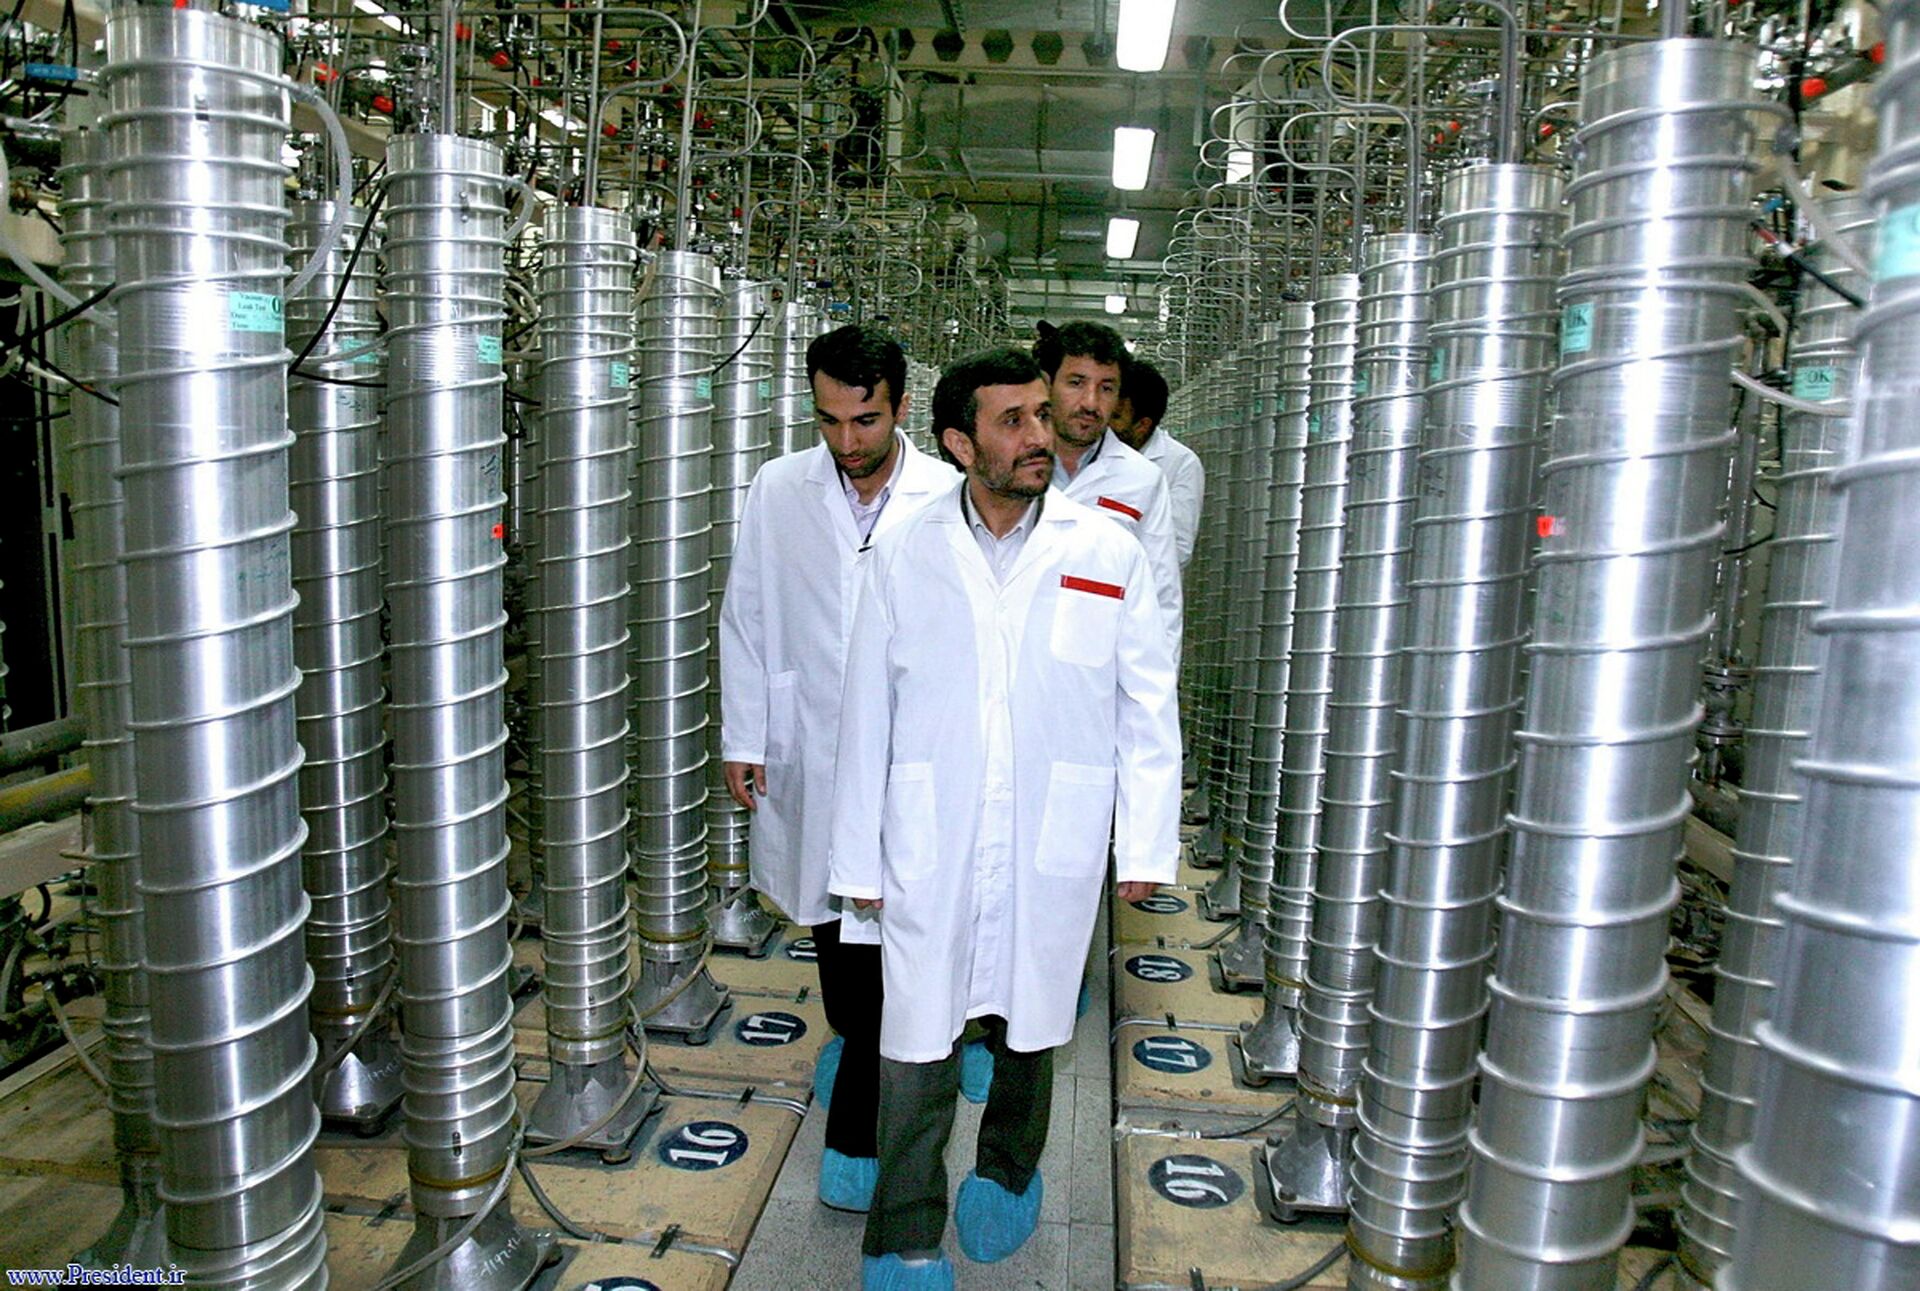 Natanz Plant Incident Caused by 'Act of Nuclear Terrorism', Iran's Vice-President Says - Sputnik International, 1920, 11.04.2021